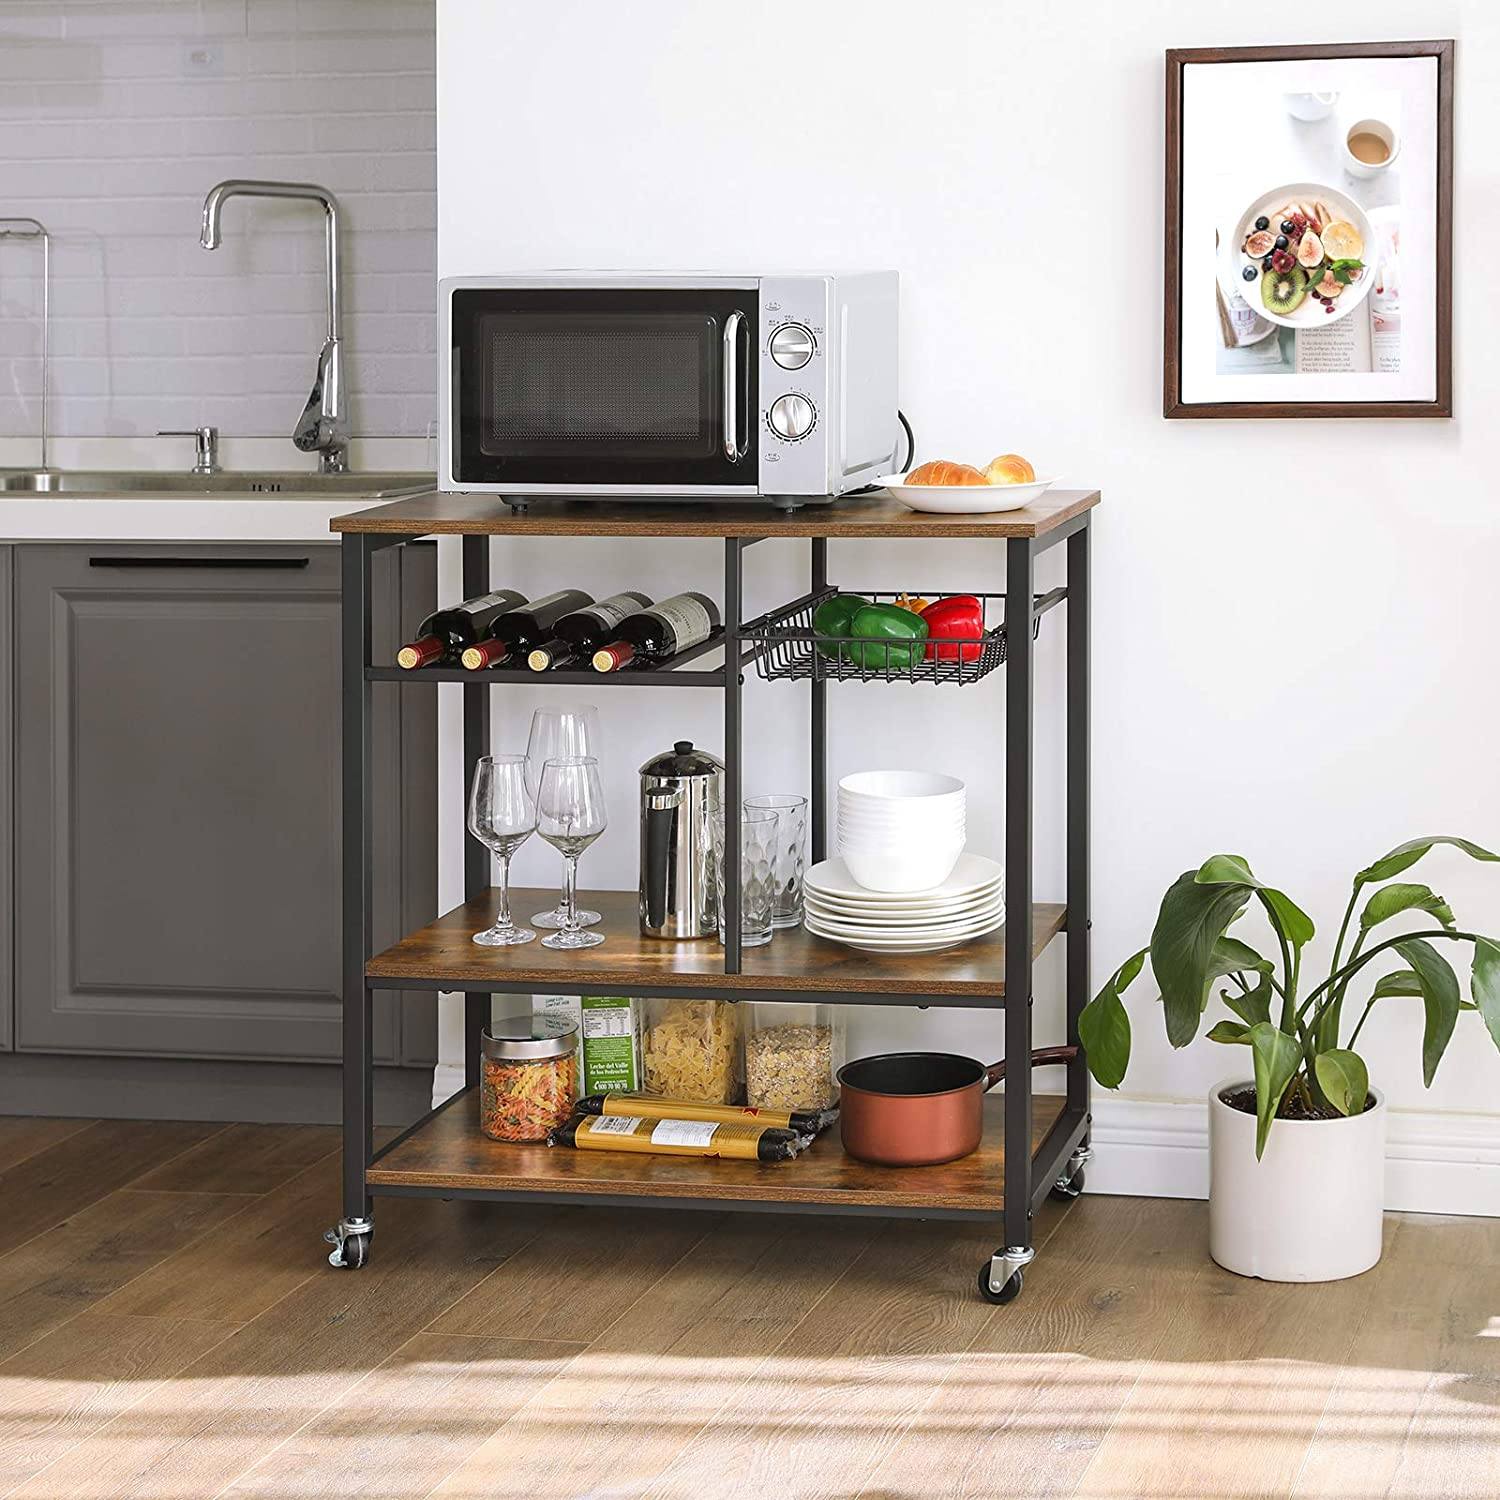 Baker? Rack with Wheels, Kitchen Island, Food Trolley with metal Mesh Basket, Bottle Holder and Storage Shelves, 80 x 40 x 86.5 cm, Industrial Style, Rustic Brown KKS80X RAW58.dk 